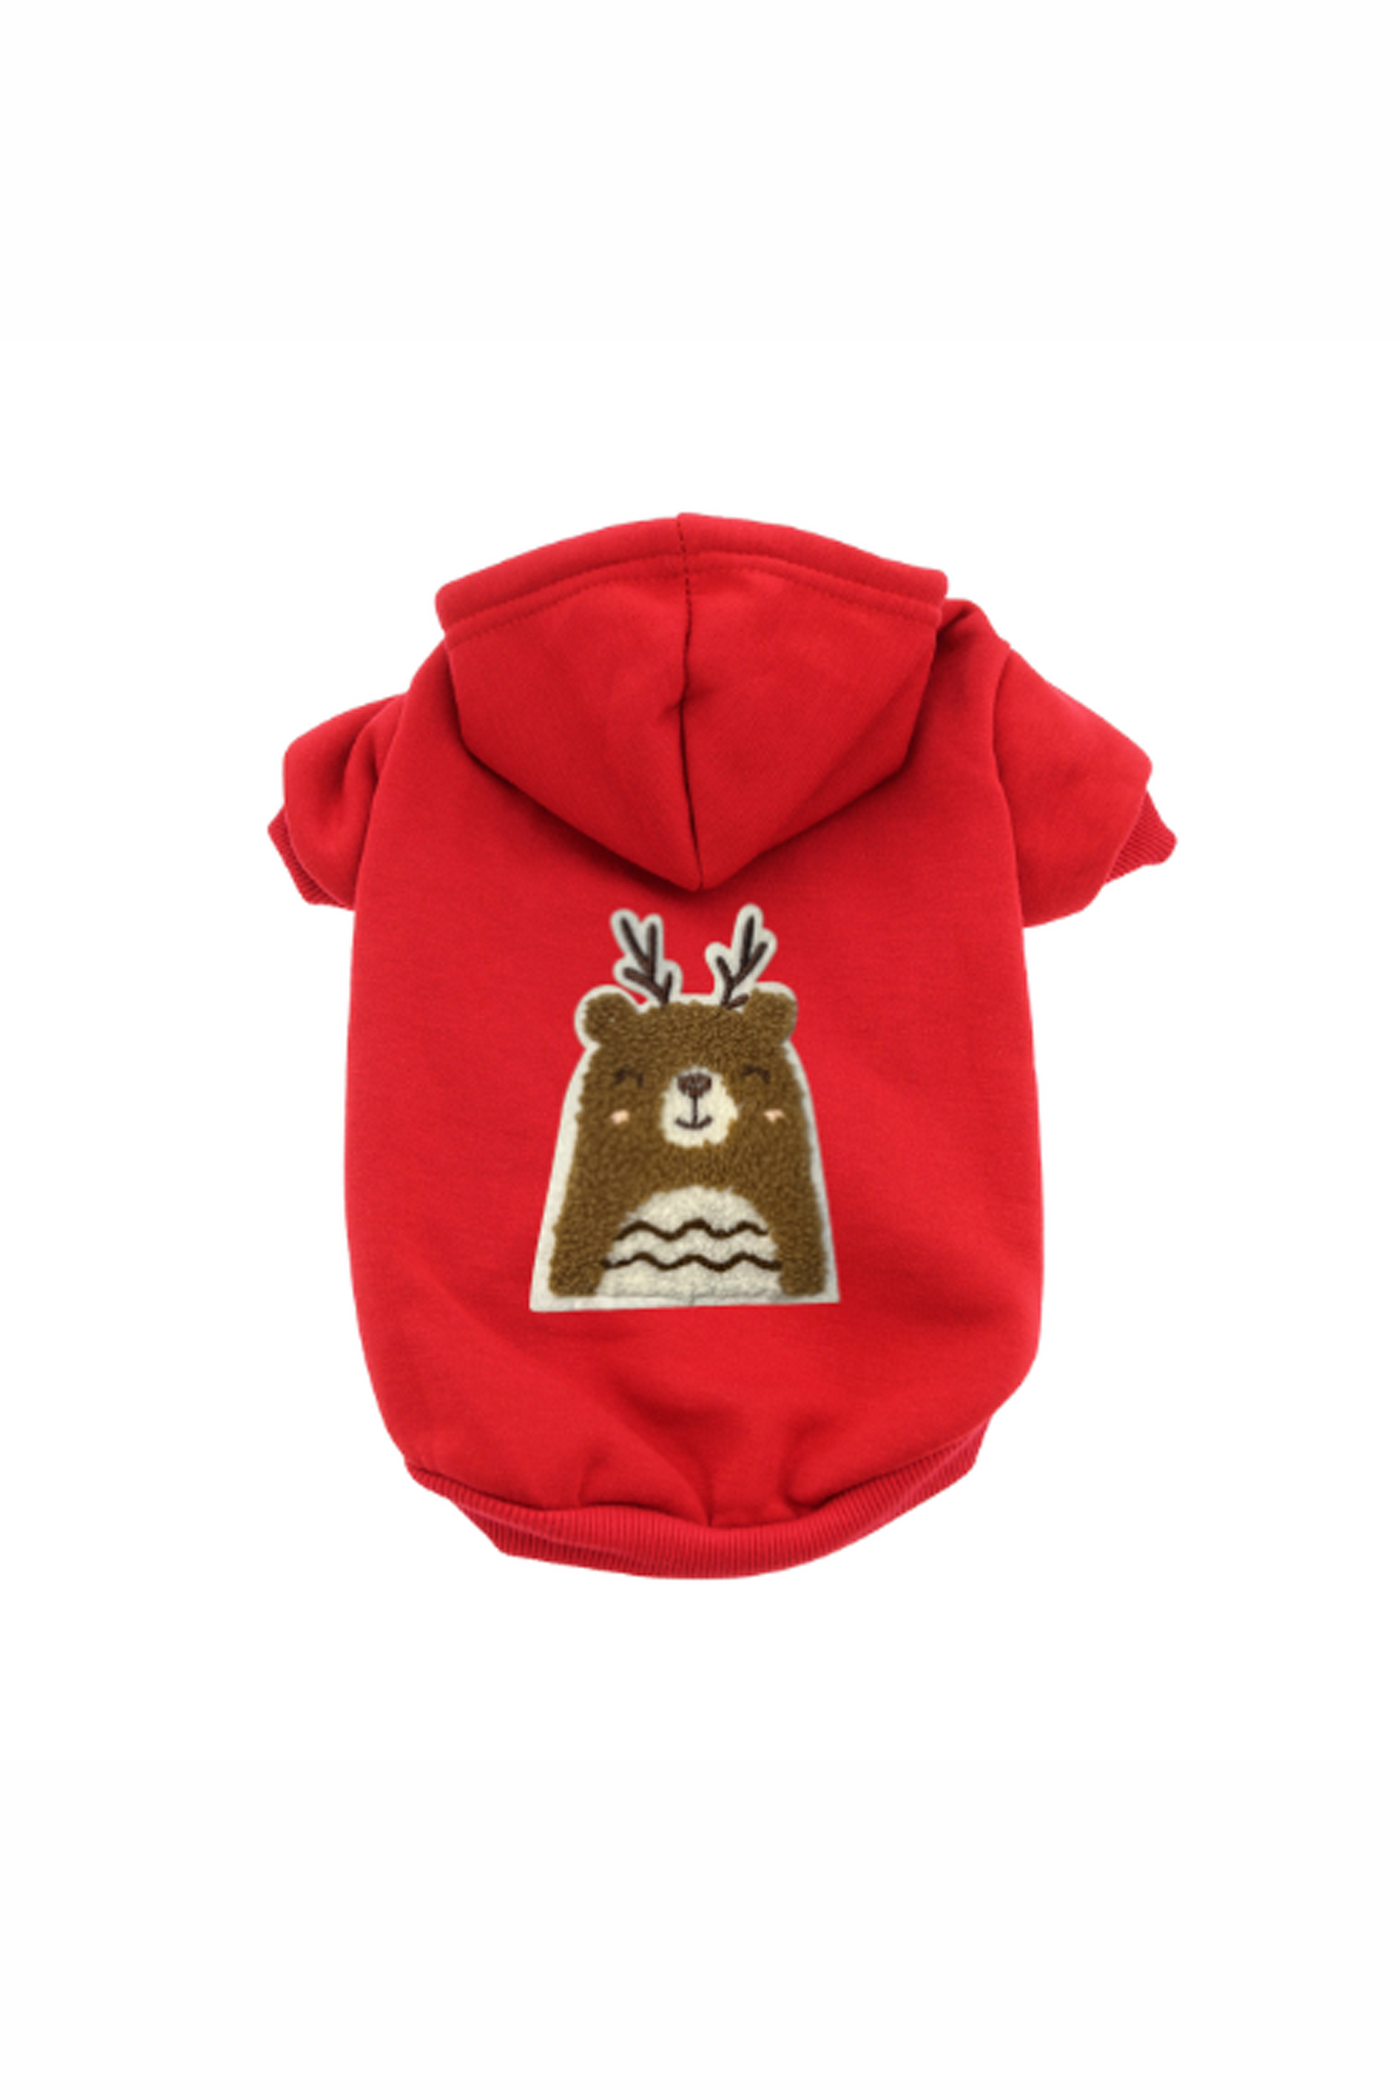 bark fifth avenue: cuddle antler bear drawstring hoodie for pets, dogs / cats